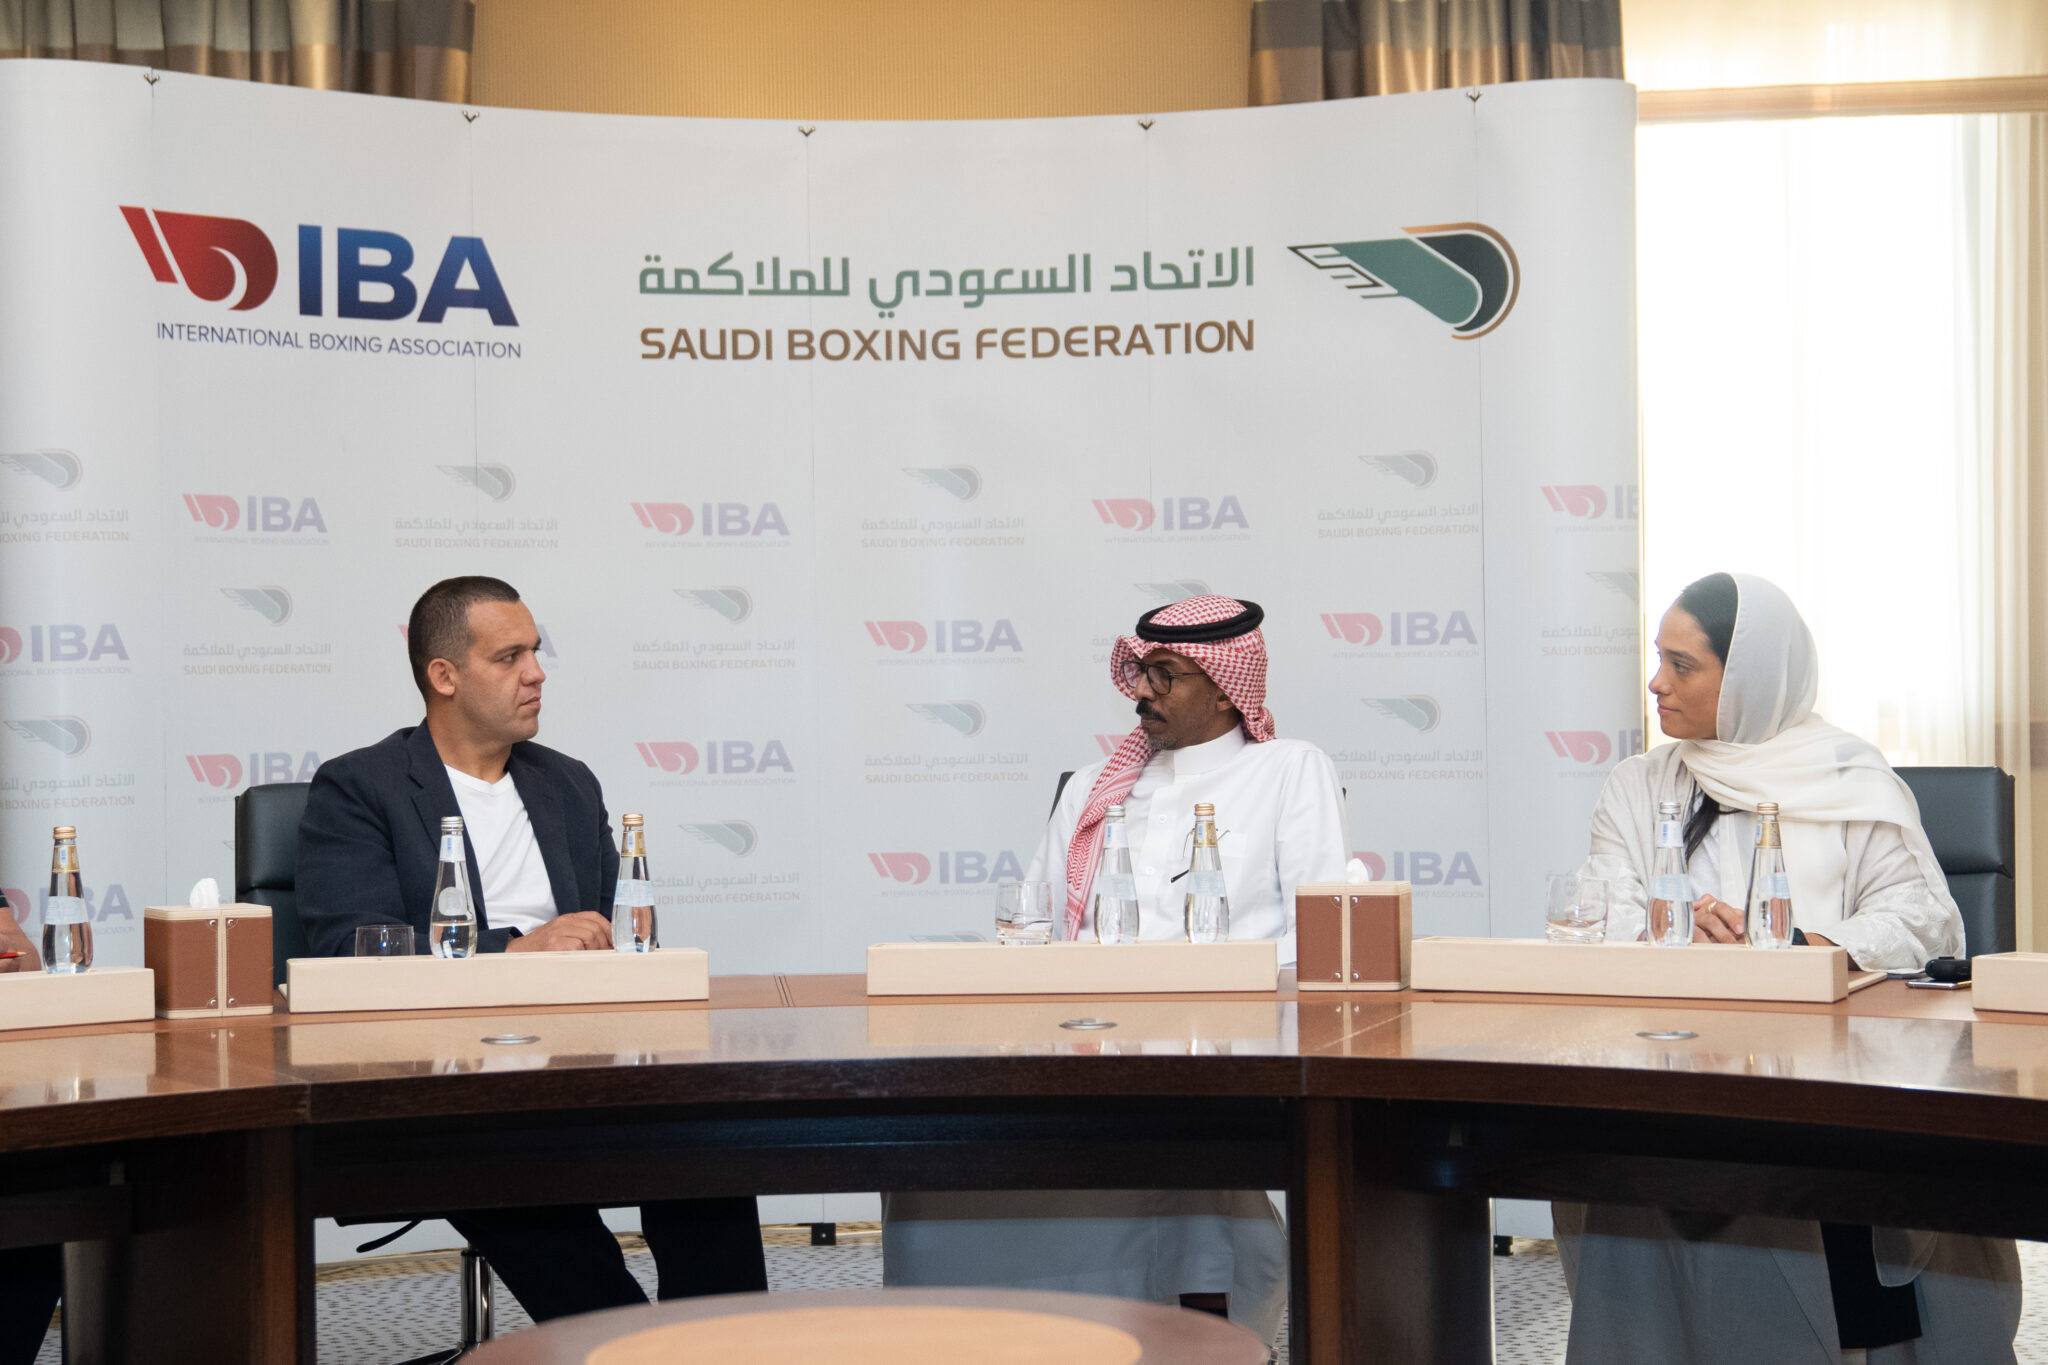 IBA President Kremlev meets sports officials during visits to Saudi Arabia and Palestine